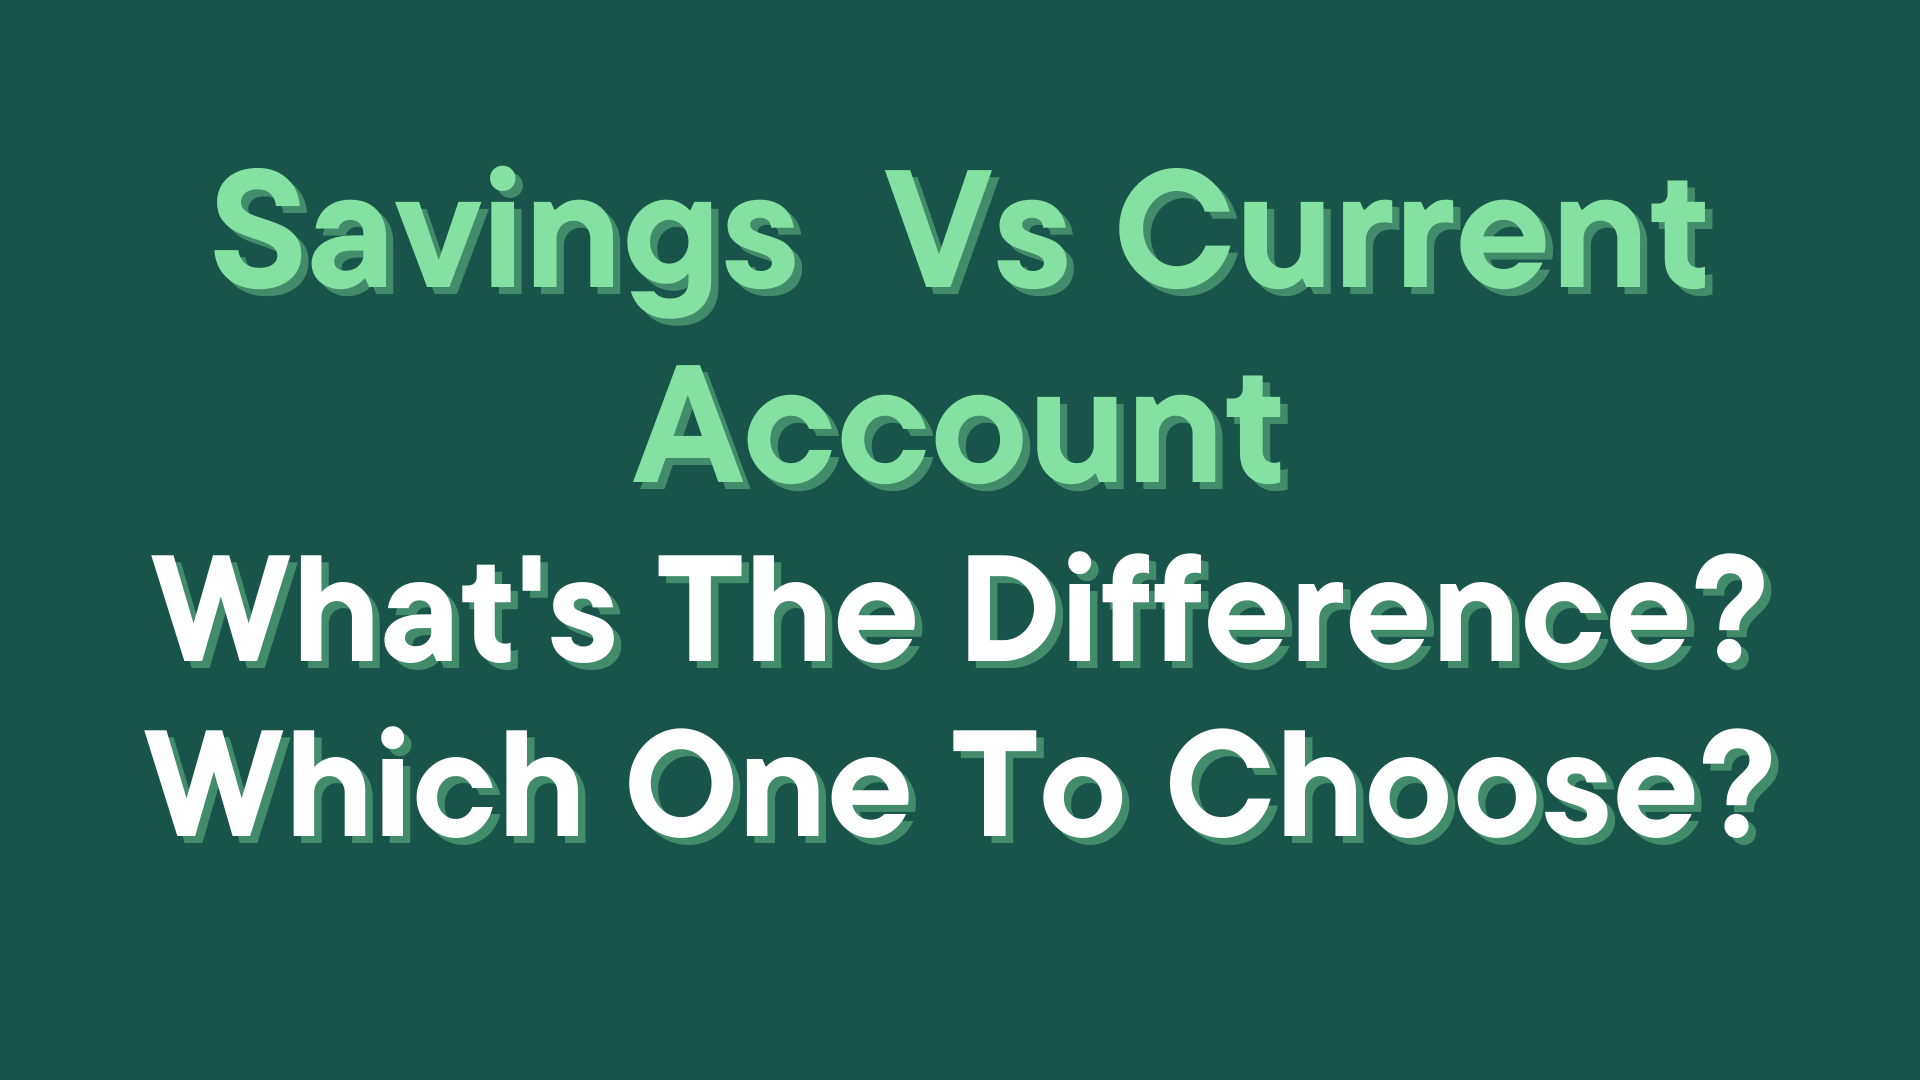 Savings Account Or Current Account?